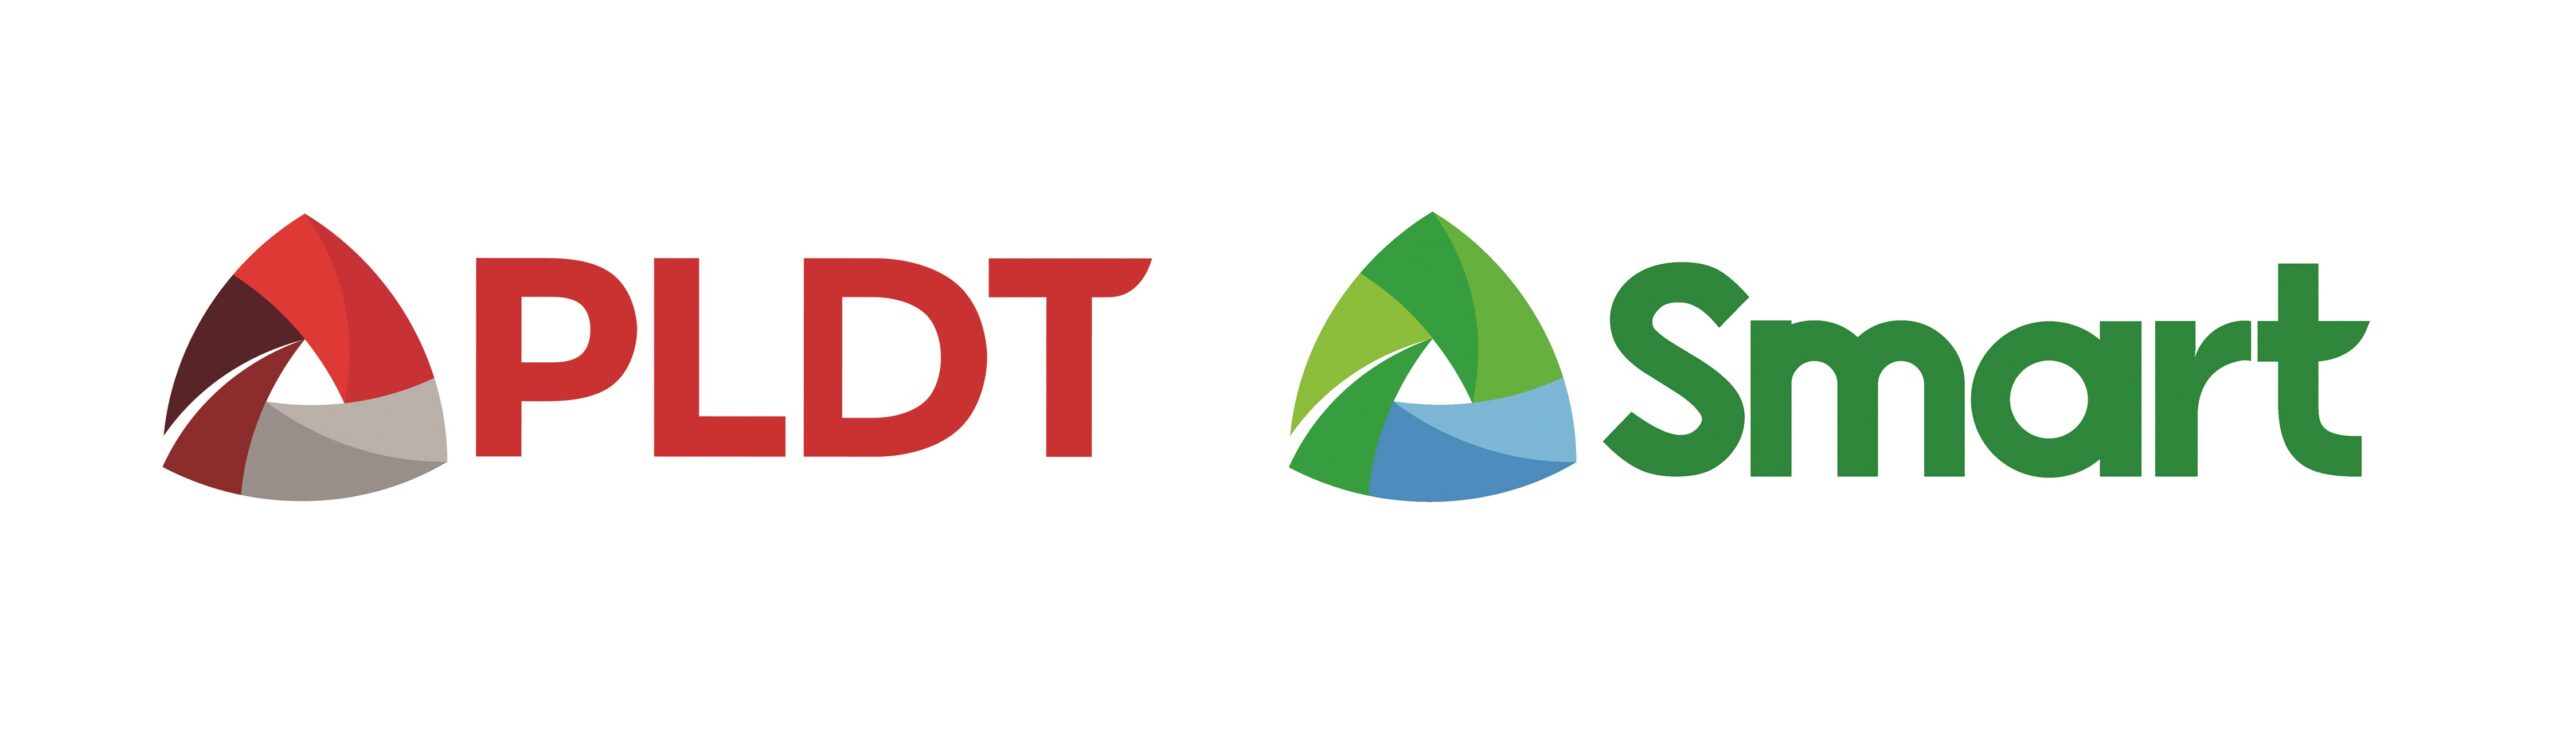 PLDT And Smart Unified Logos JPEG Scaled